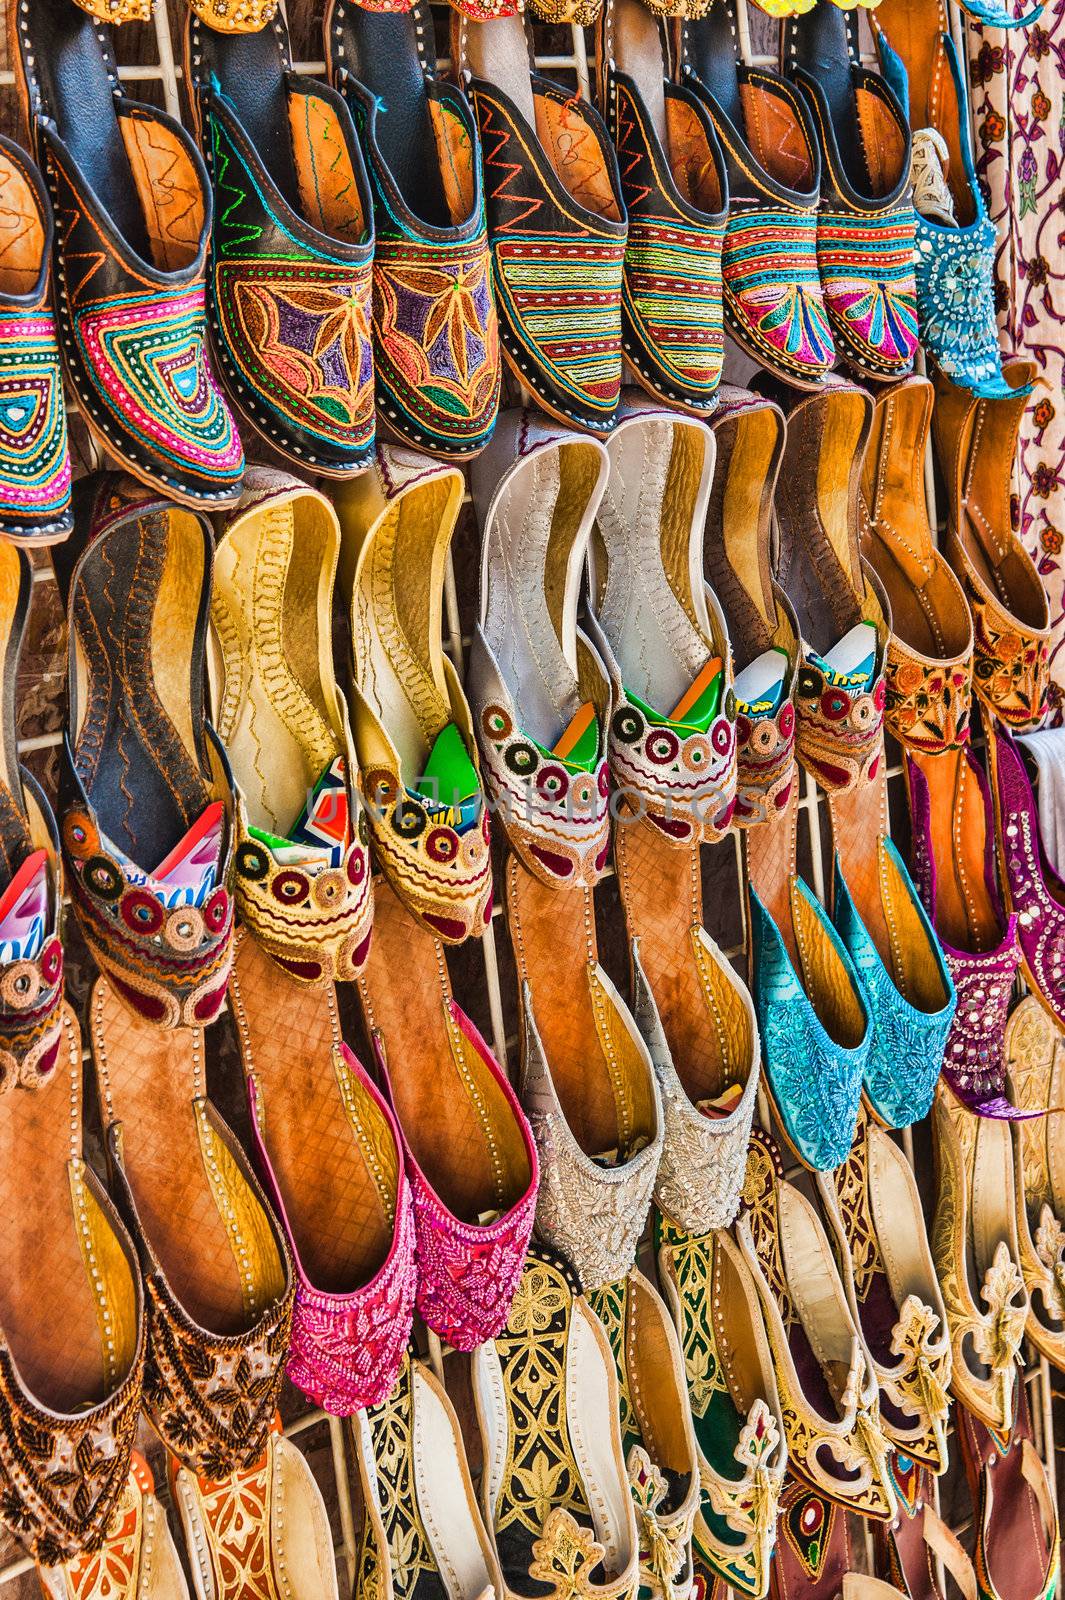 Women's summer shoes in the Eastern market in Dubai, United Arab Emirates